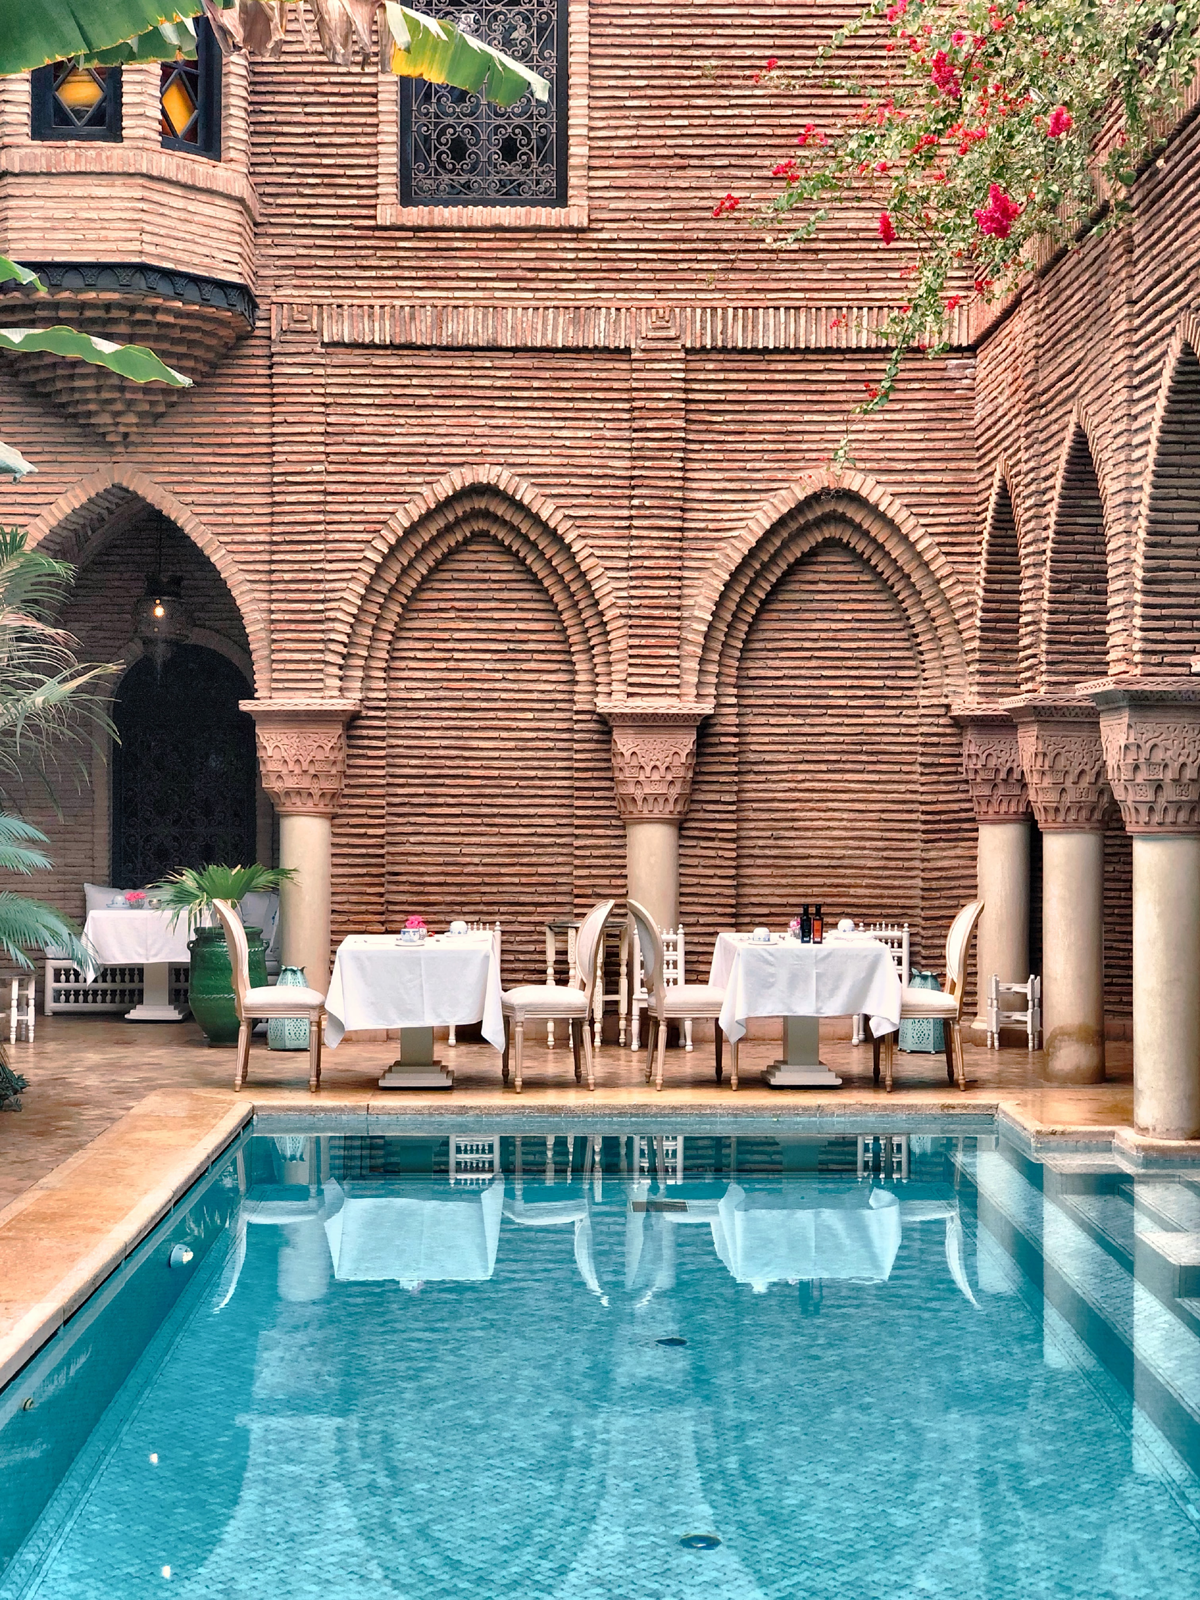 Things to do in Marrakech - Riad